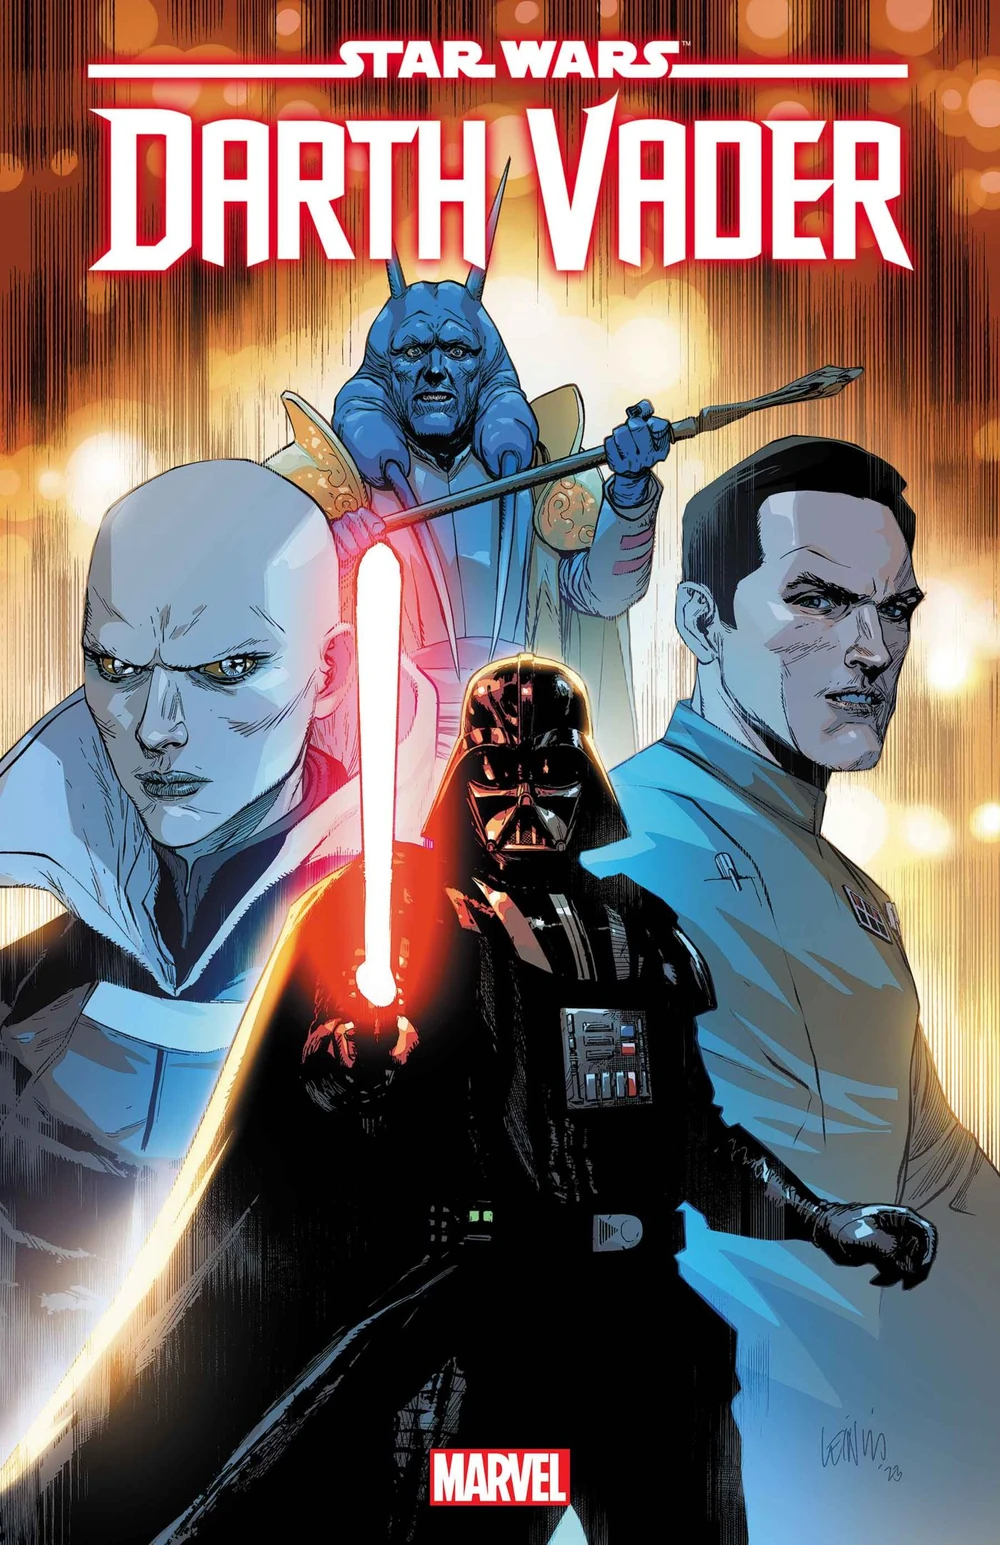 Star Wars: Darth Vader #42, the Empire gets more complicated